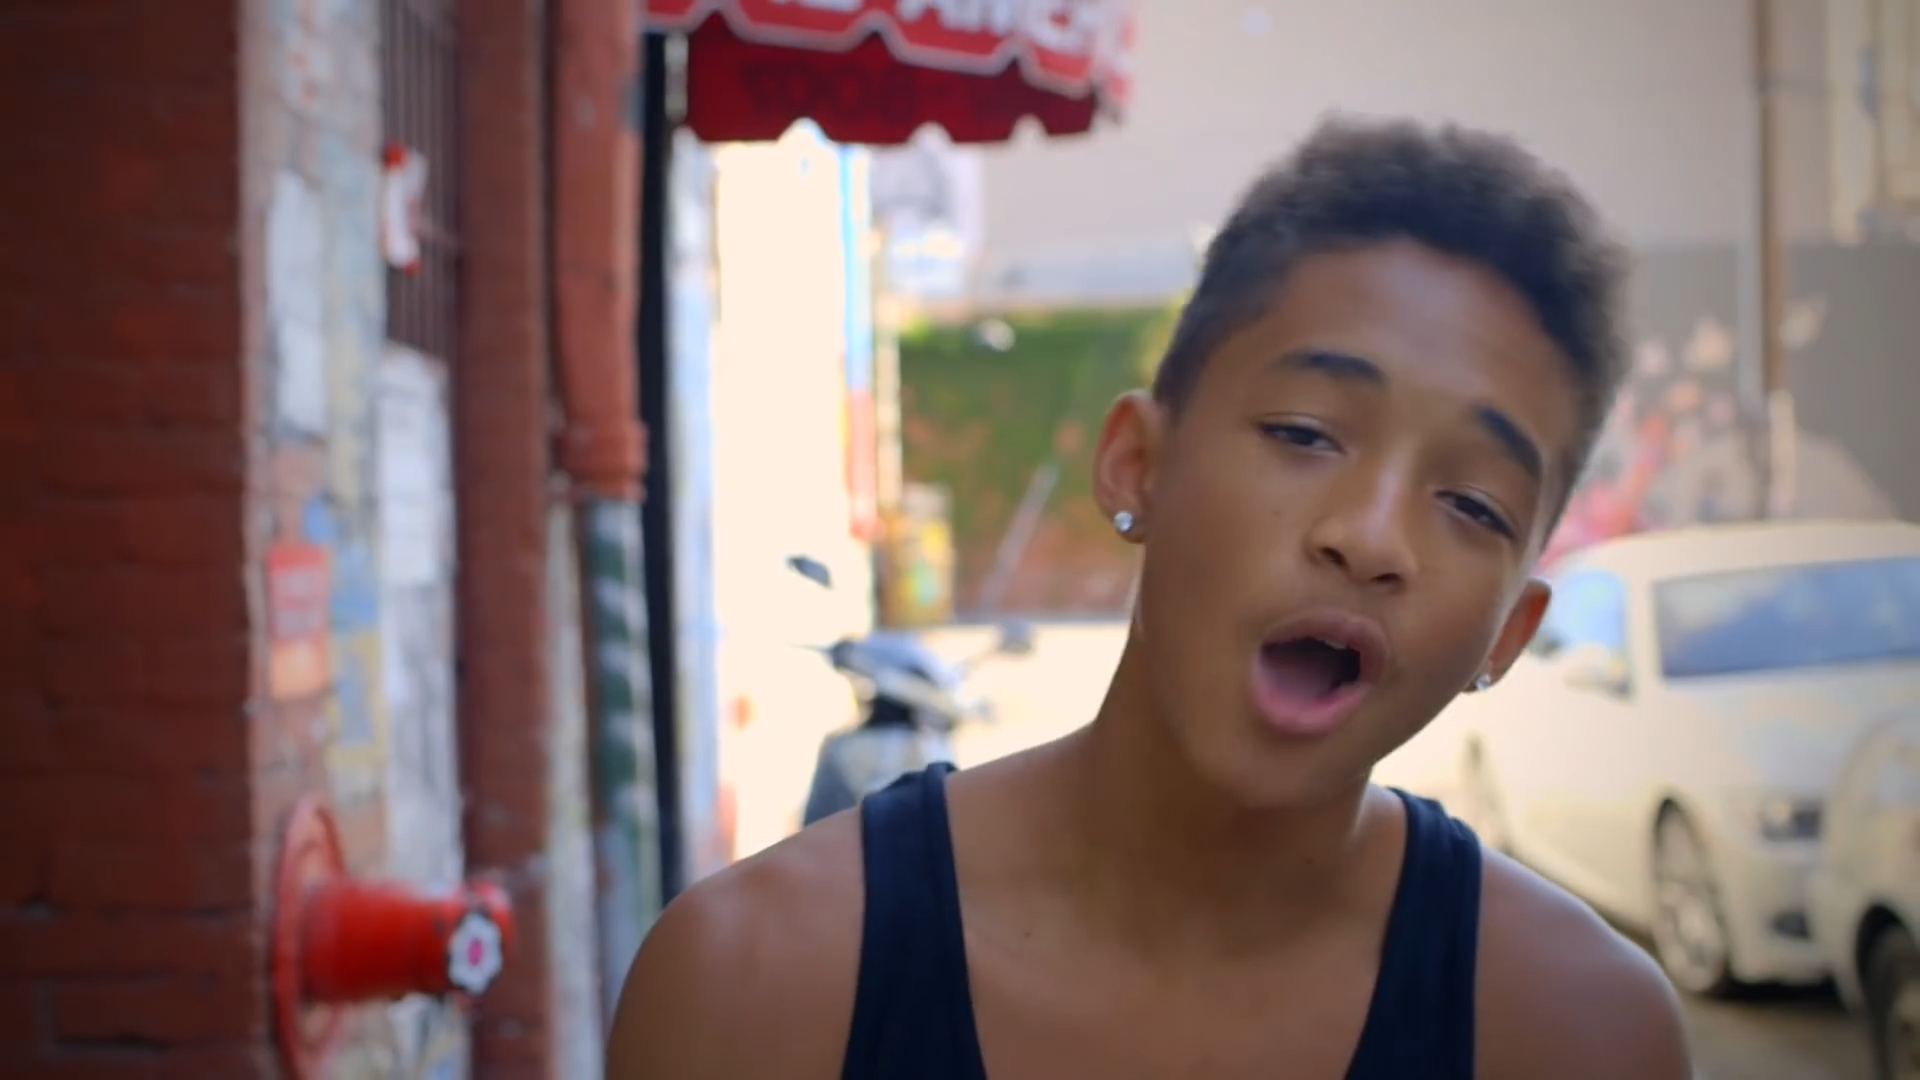 Picture Of Jaden Smith In Music Video The Coolest Jaden Smith 1643333395 Teen Idols 4 You 6084